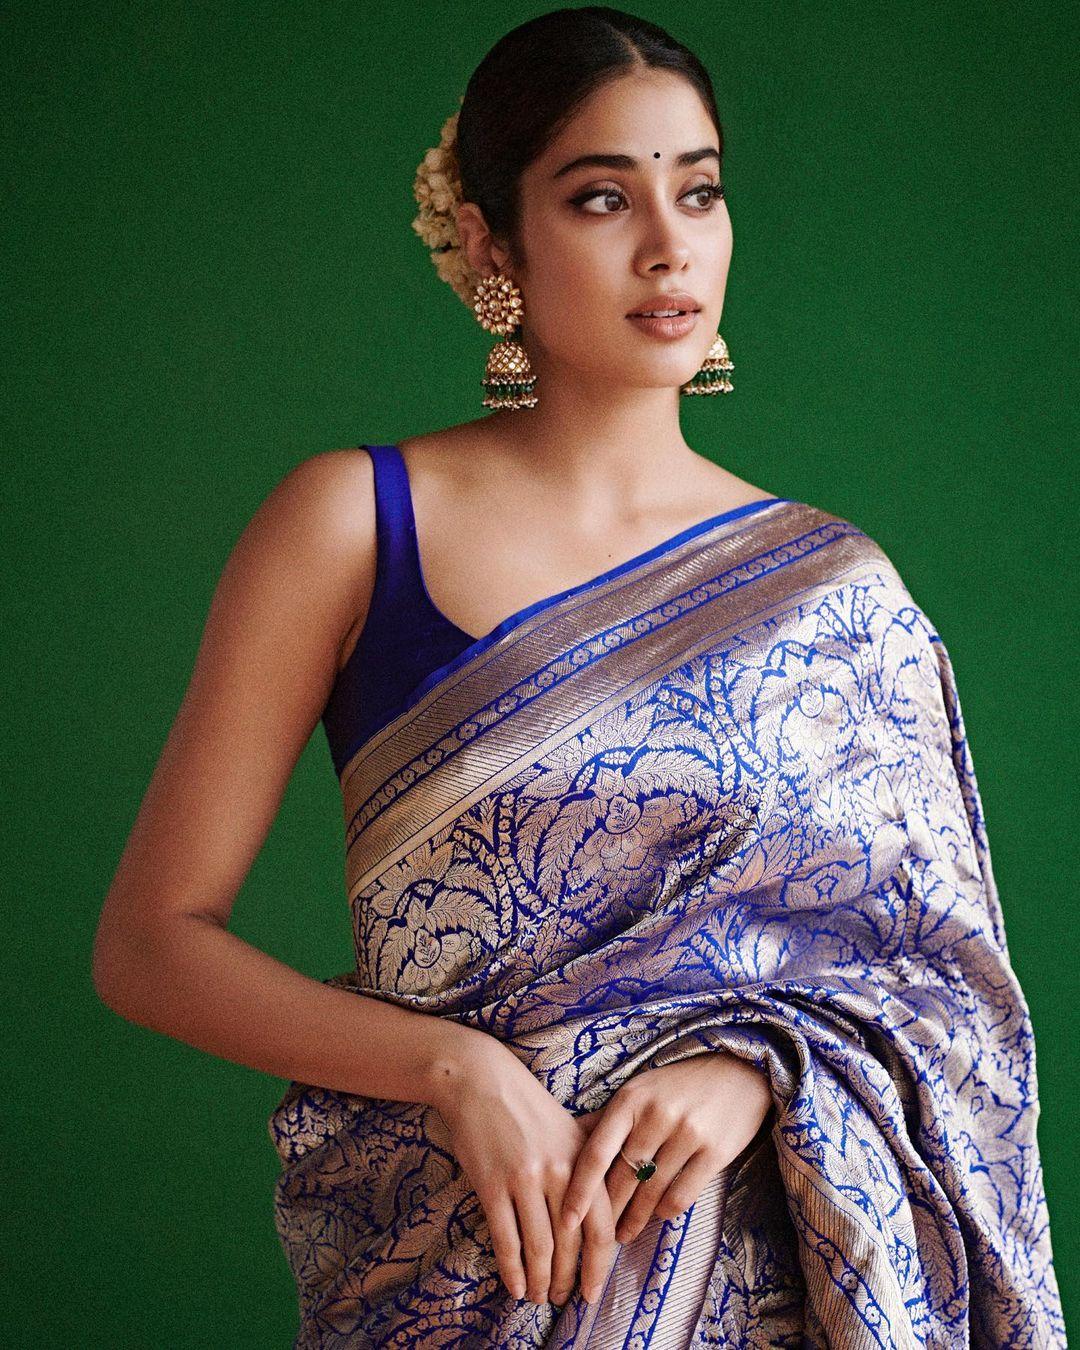 If you're looking for the perfect Navami outfit, Janhvi Kapoor's choice of a stunning navy blue silk saree, adorned with intricate embroidery and wide, silvery borders could be the one for you. This saree not only catches the eye but also serves as an exceptional choice for the occasion.